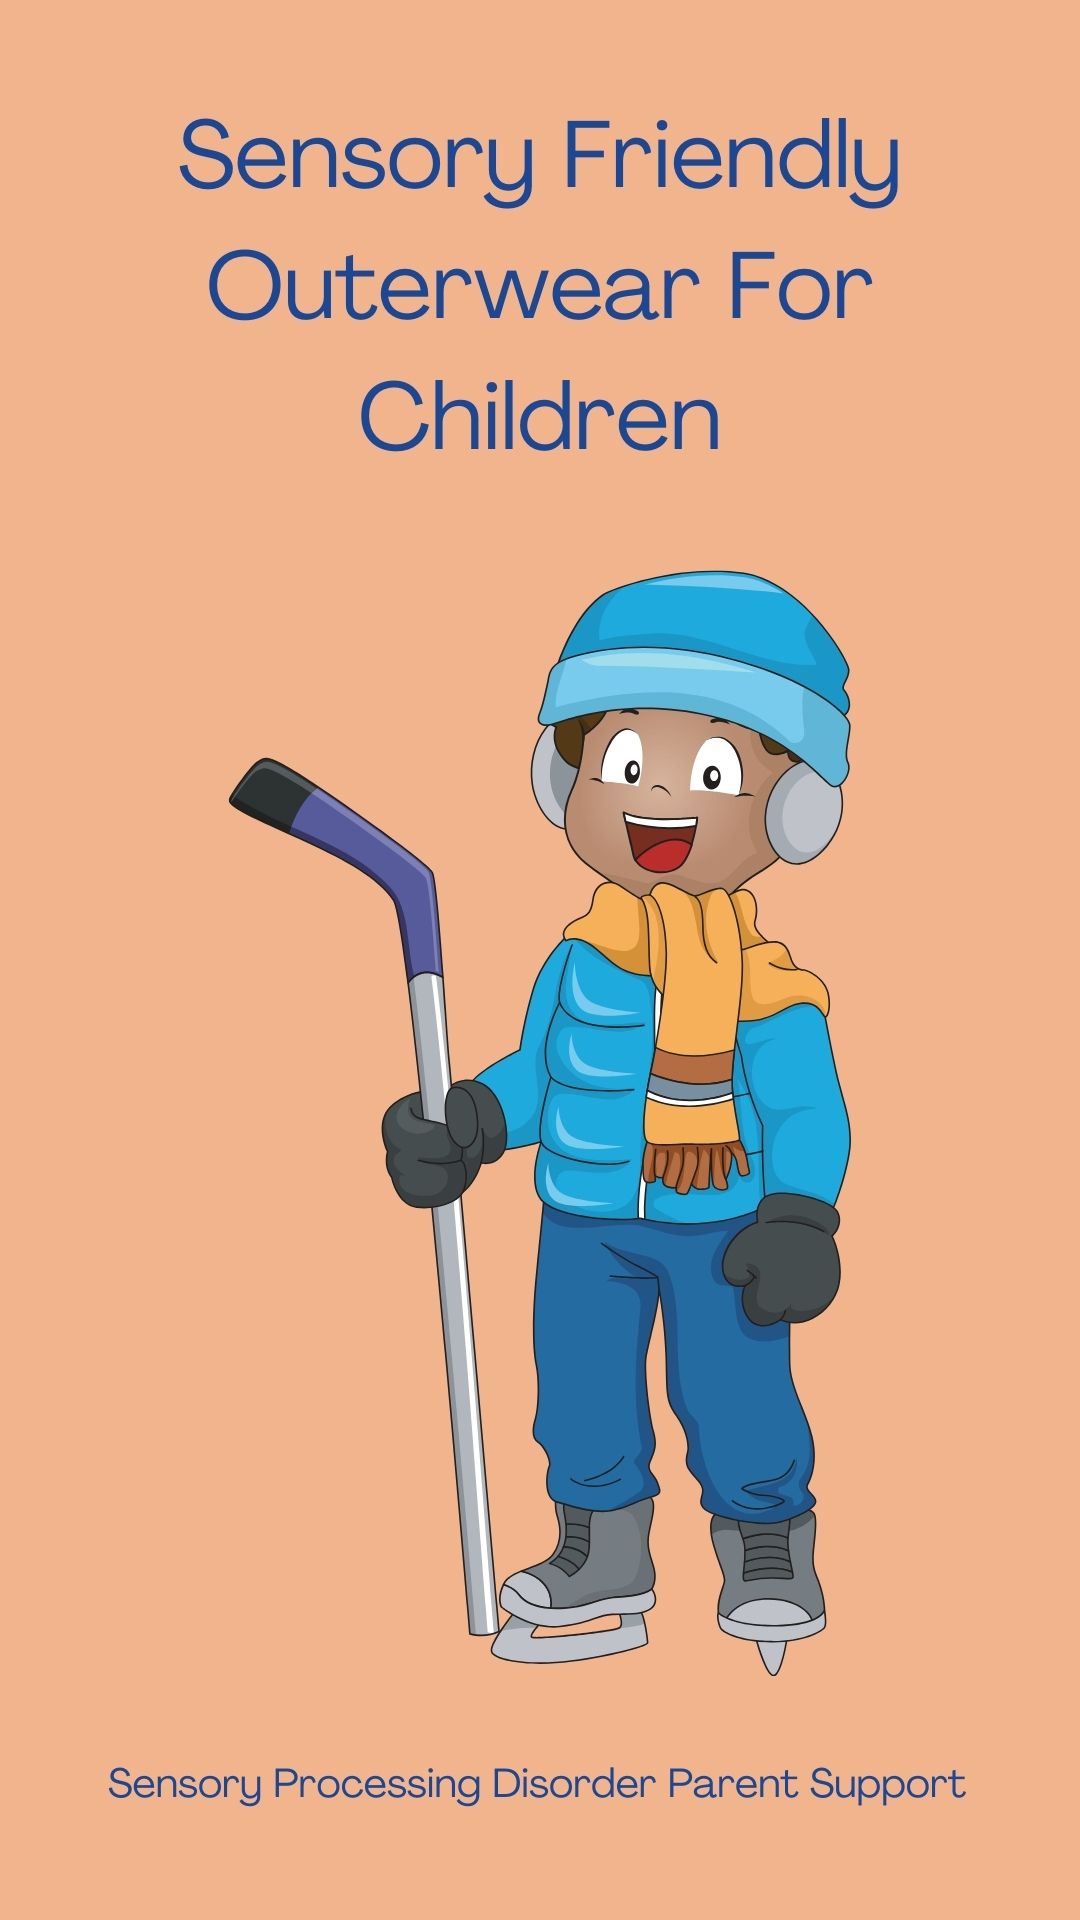 Comfy Itch-Free Sensory Friendly Outerwear For Children